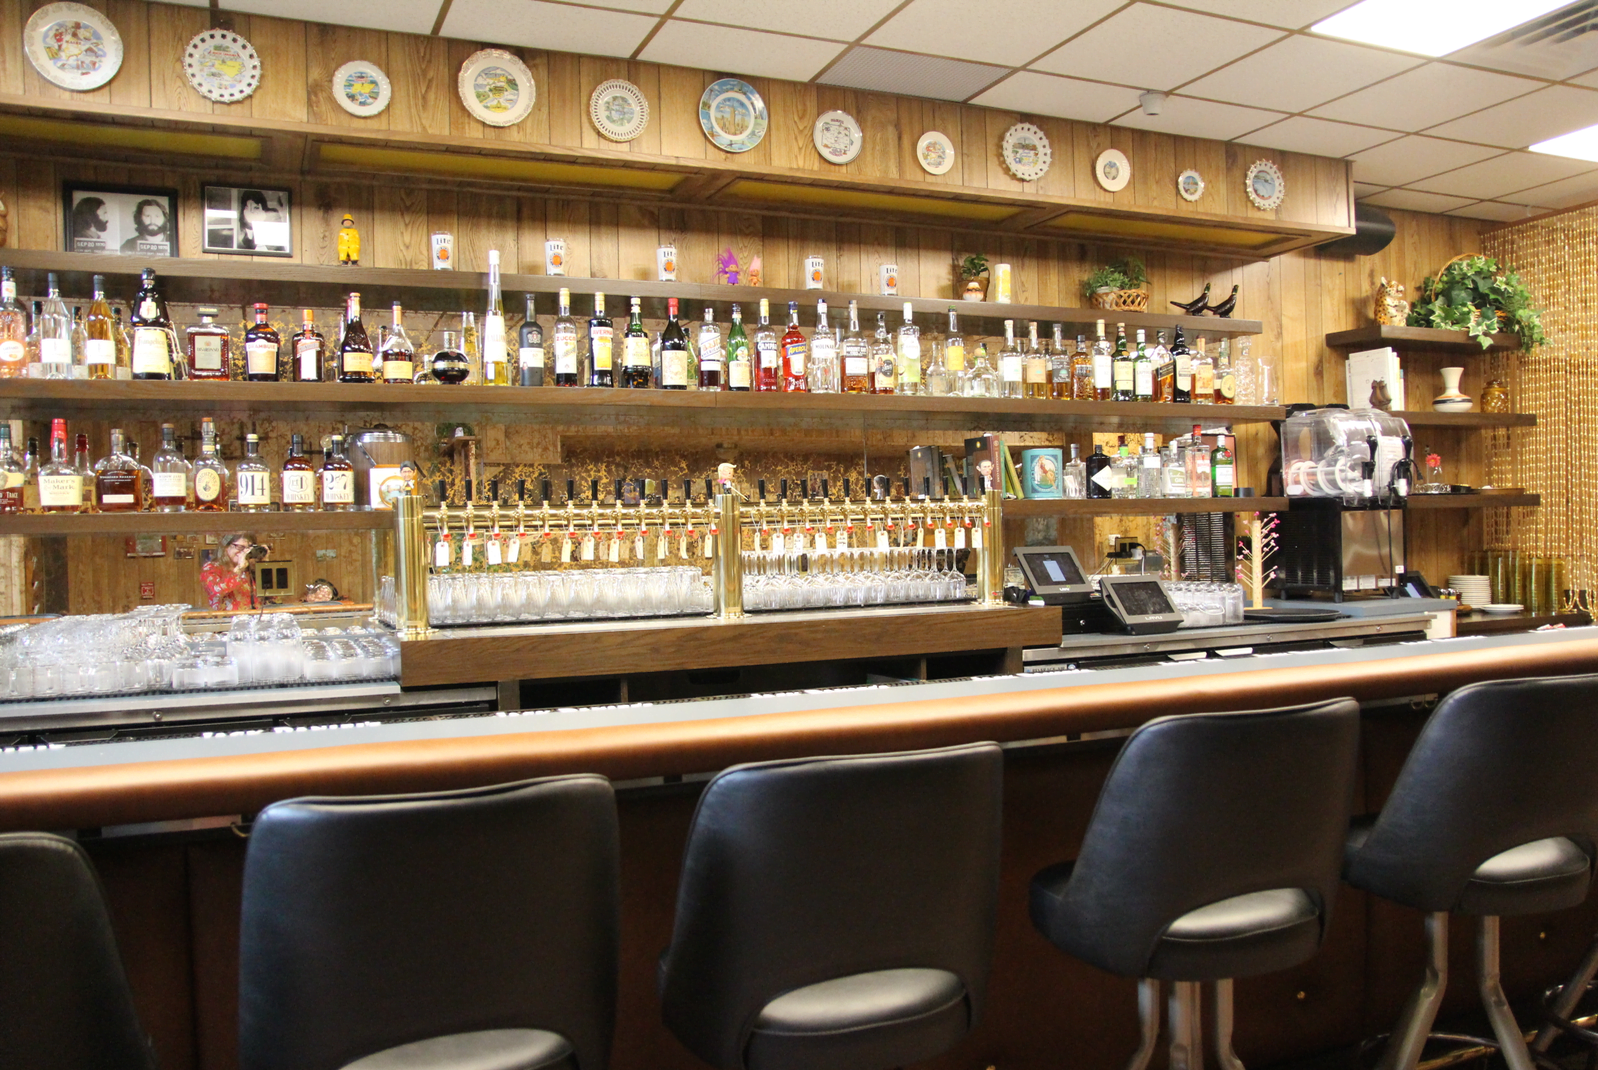 The bar at Eugene's Diner in Port Chester, NY. Photo: Leslie Yager